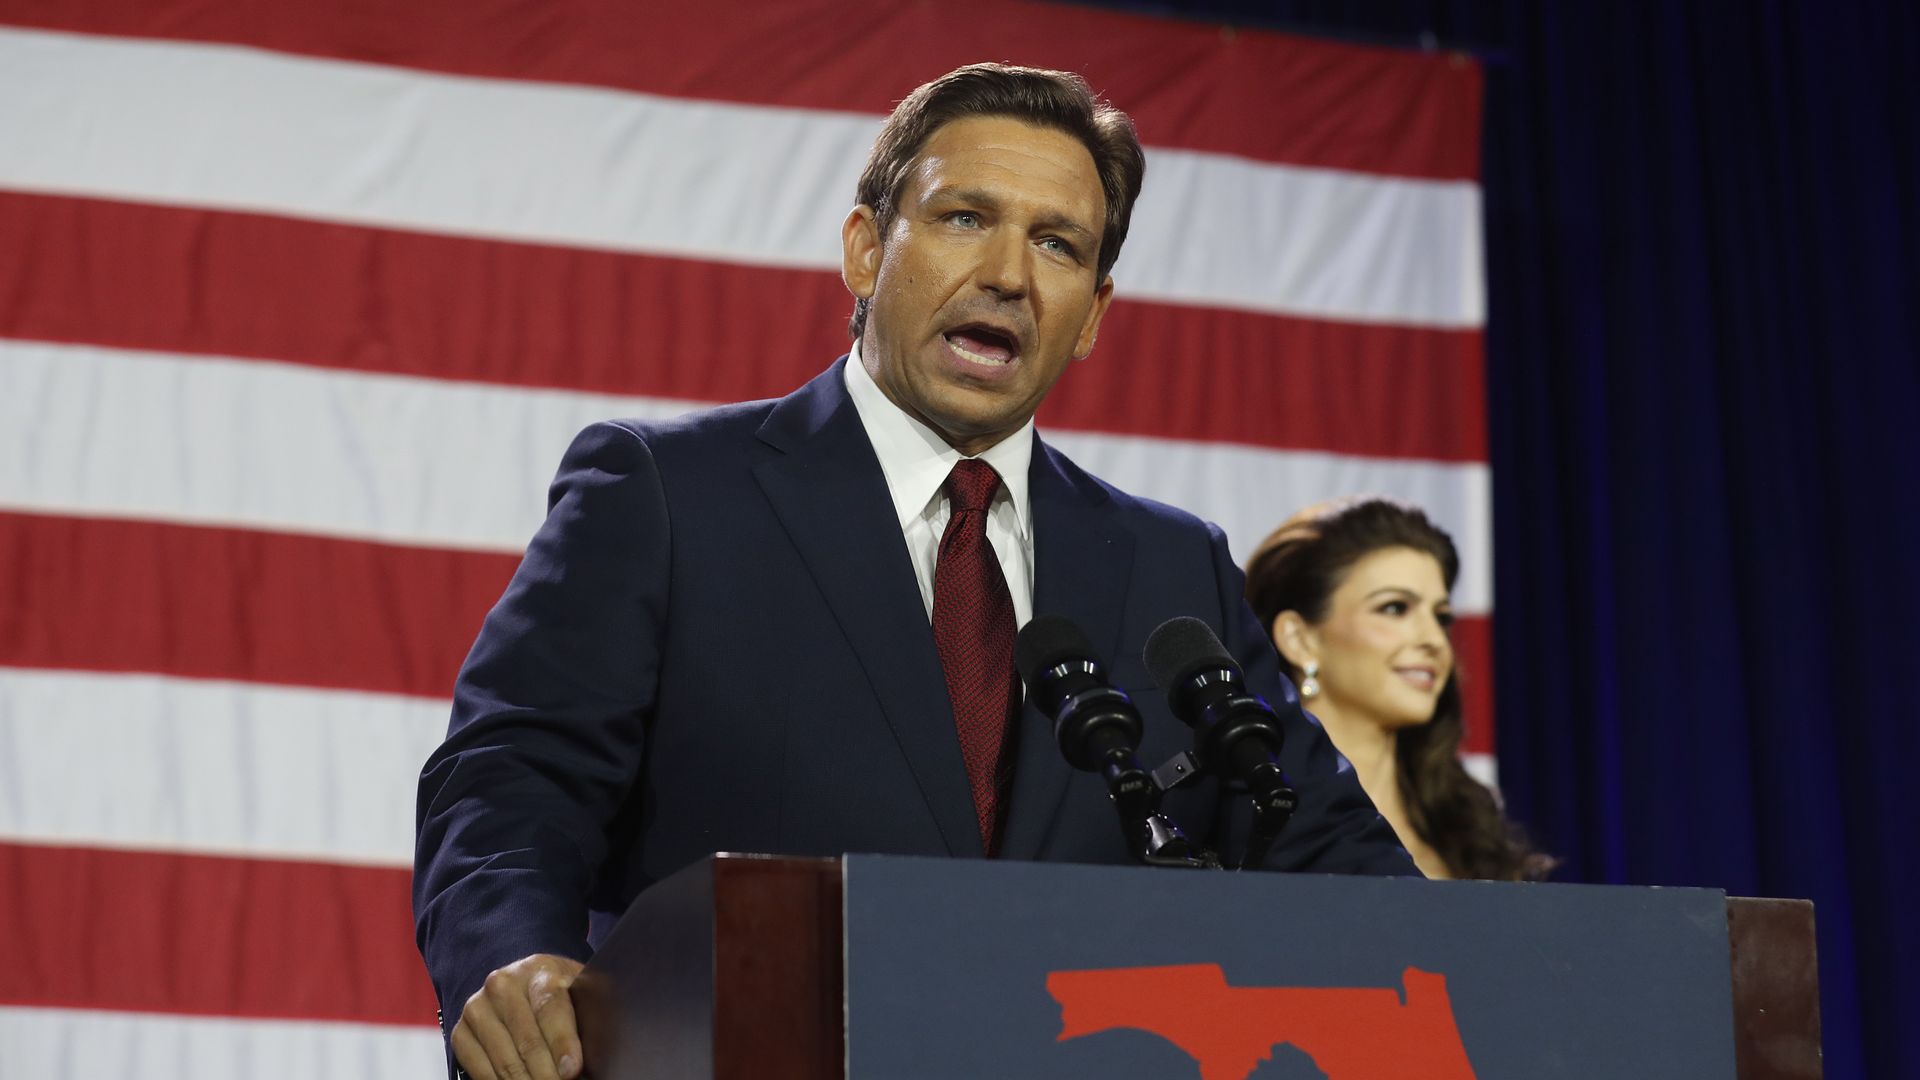 Ron DeSantis gives a victory speech after defeating Democratic gubernatorial candidate Rep. Charlie Crist